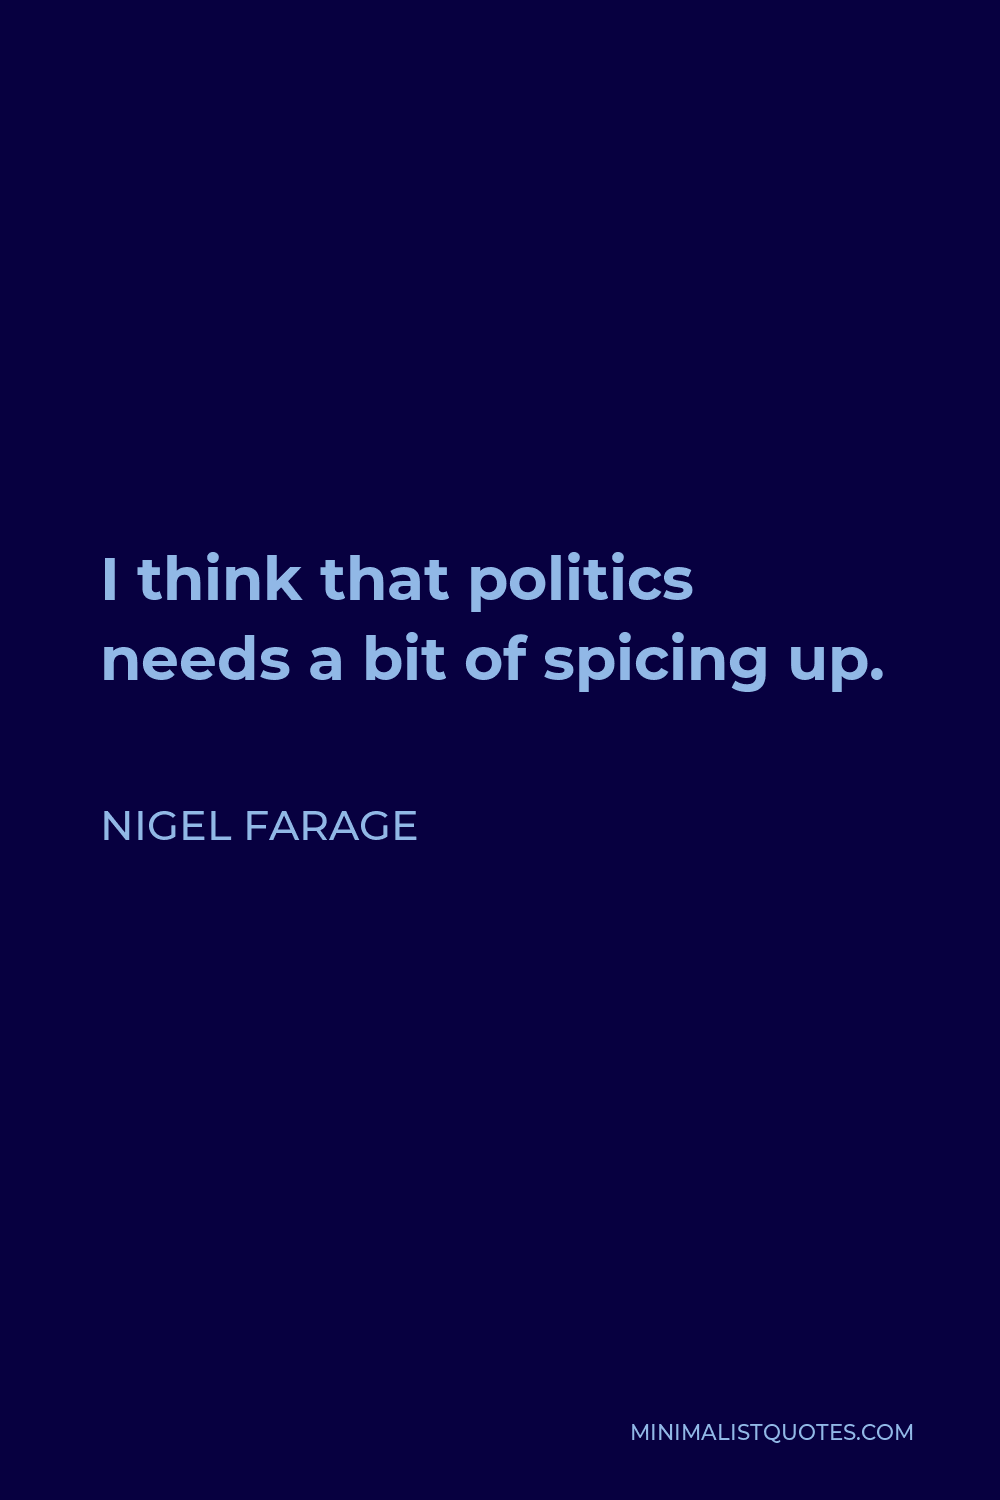 Nigel Farage Quote - I think that politics needs a bit of spicing up.